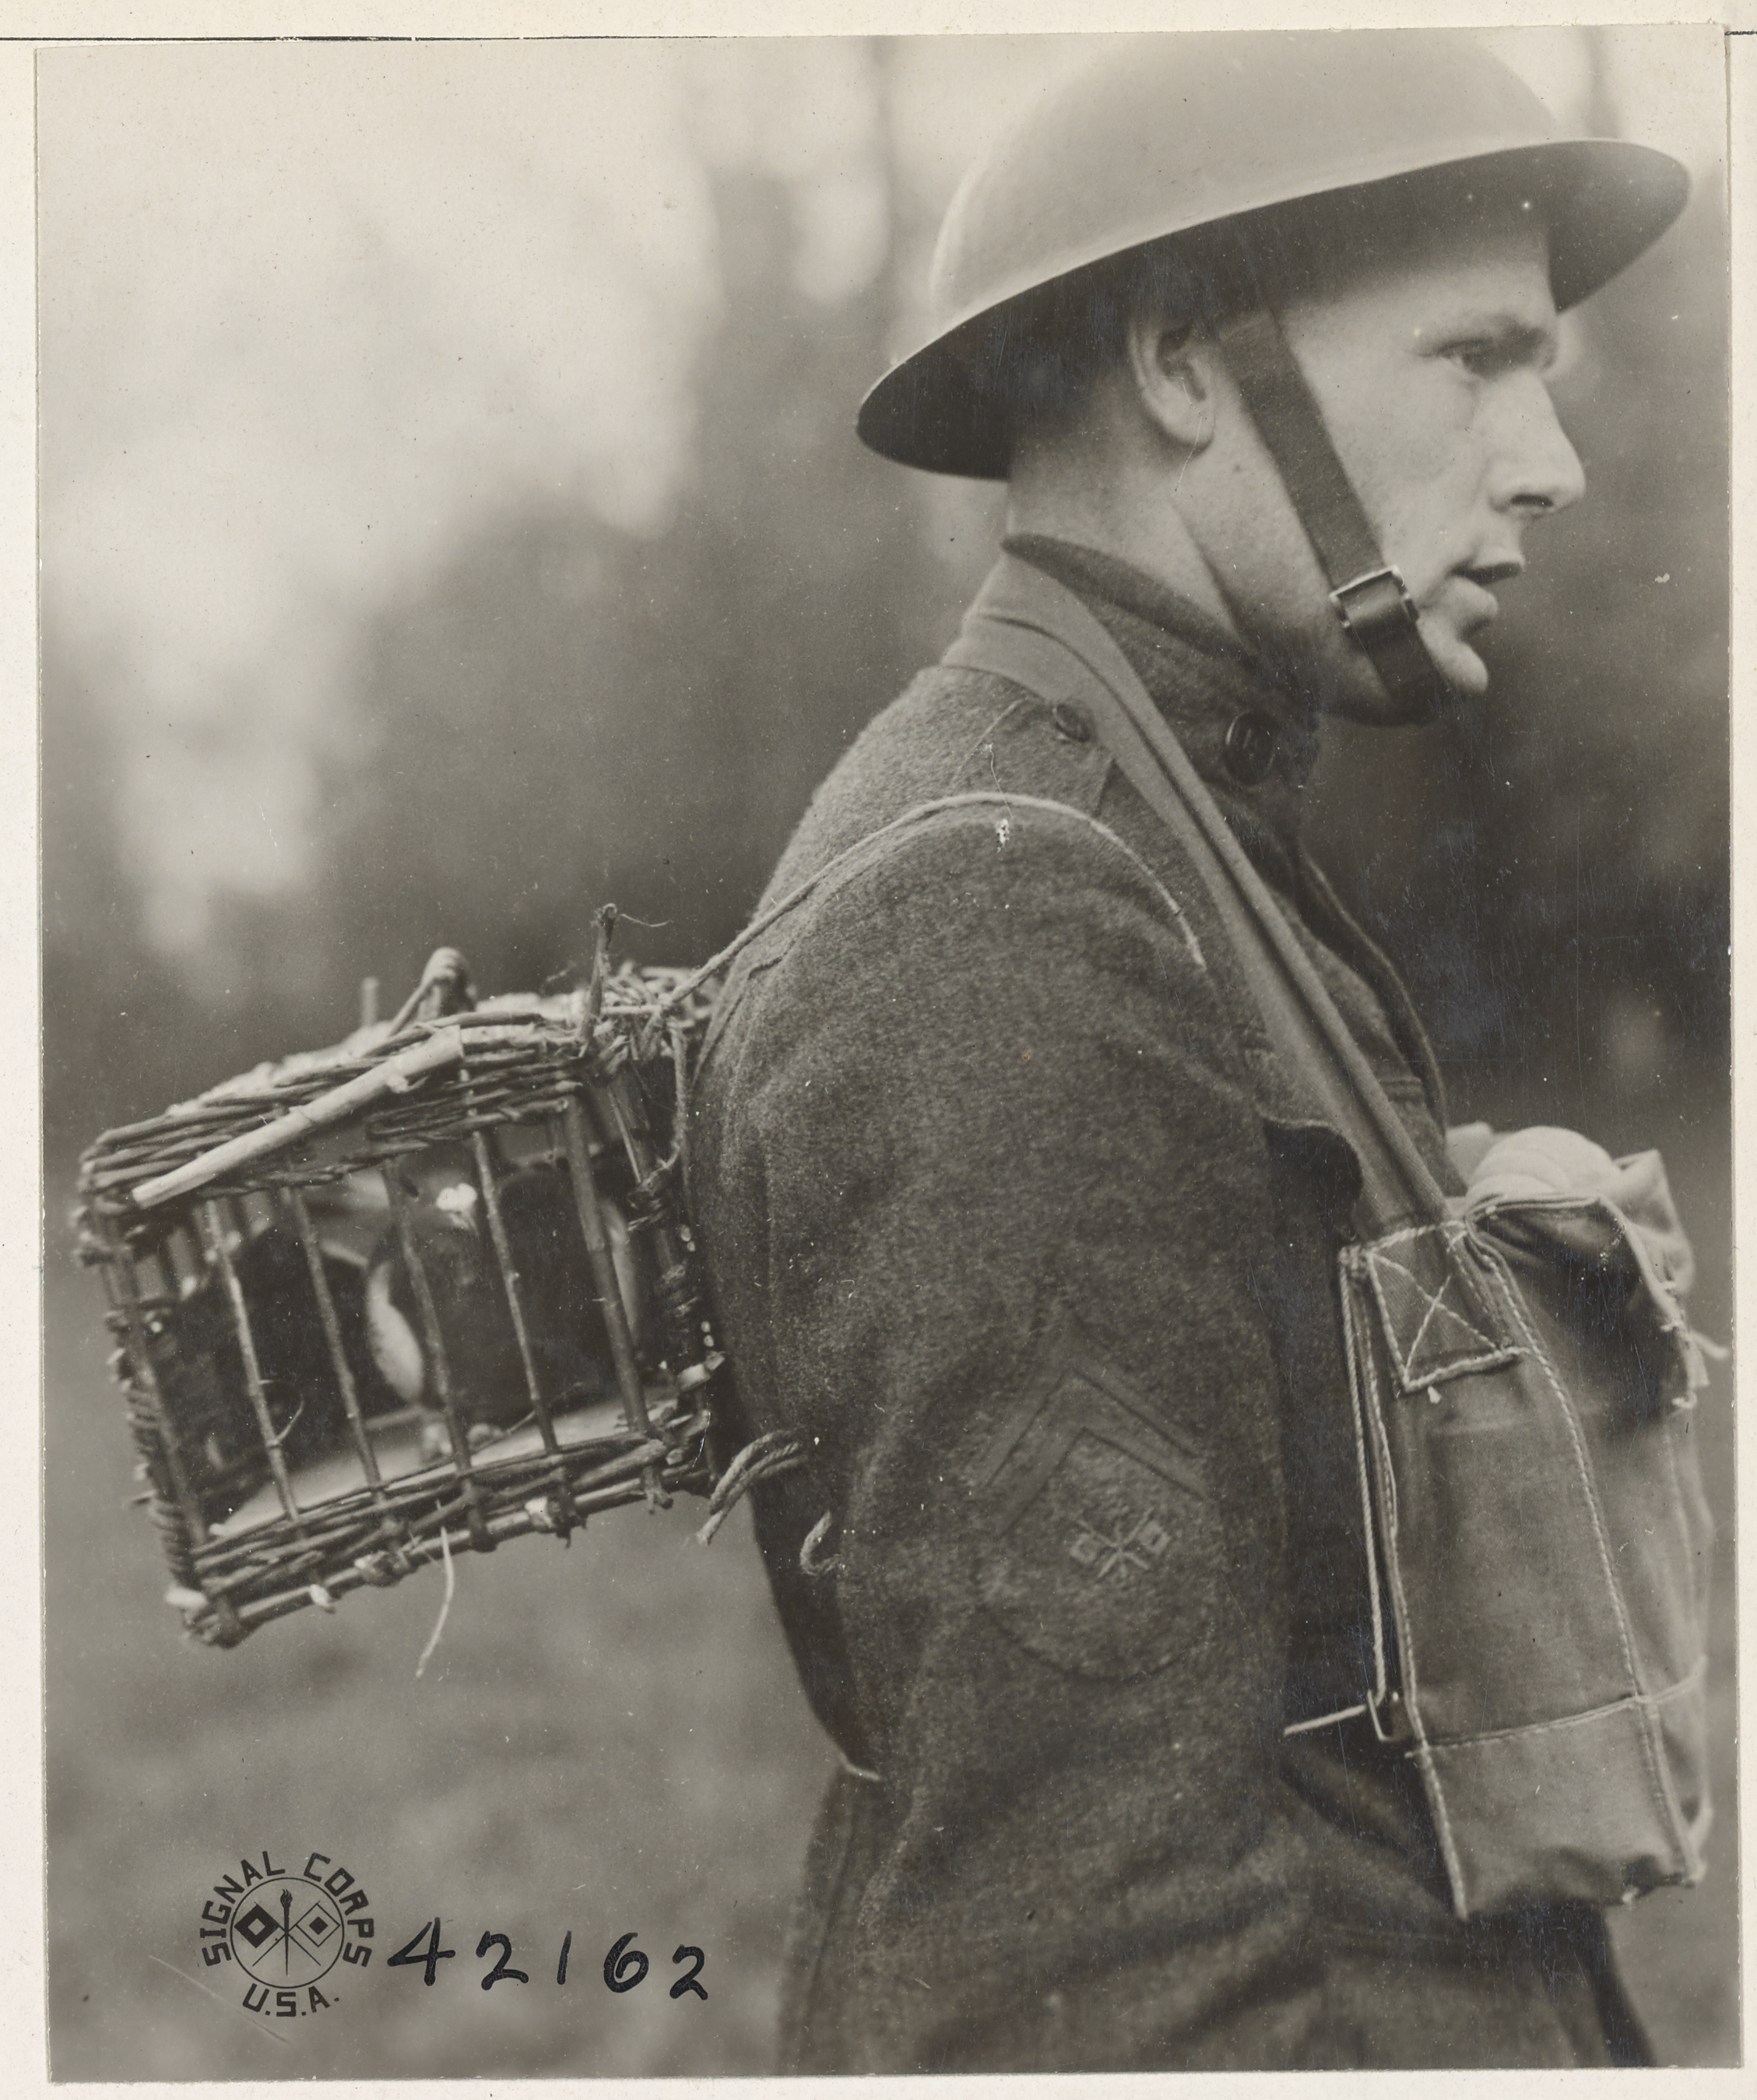 US Army Signal Corps solider with two pigeons strapped to his back, WWI, c. Oct. 1918.png